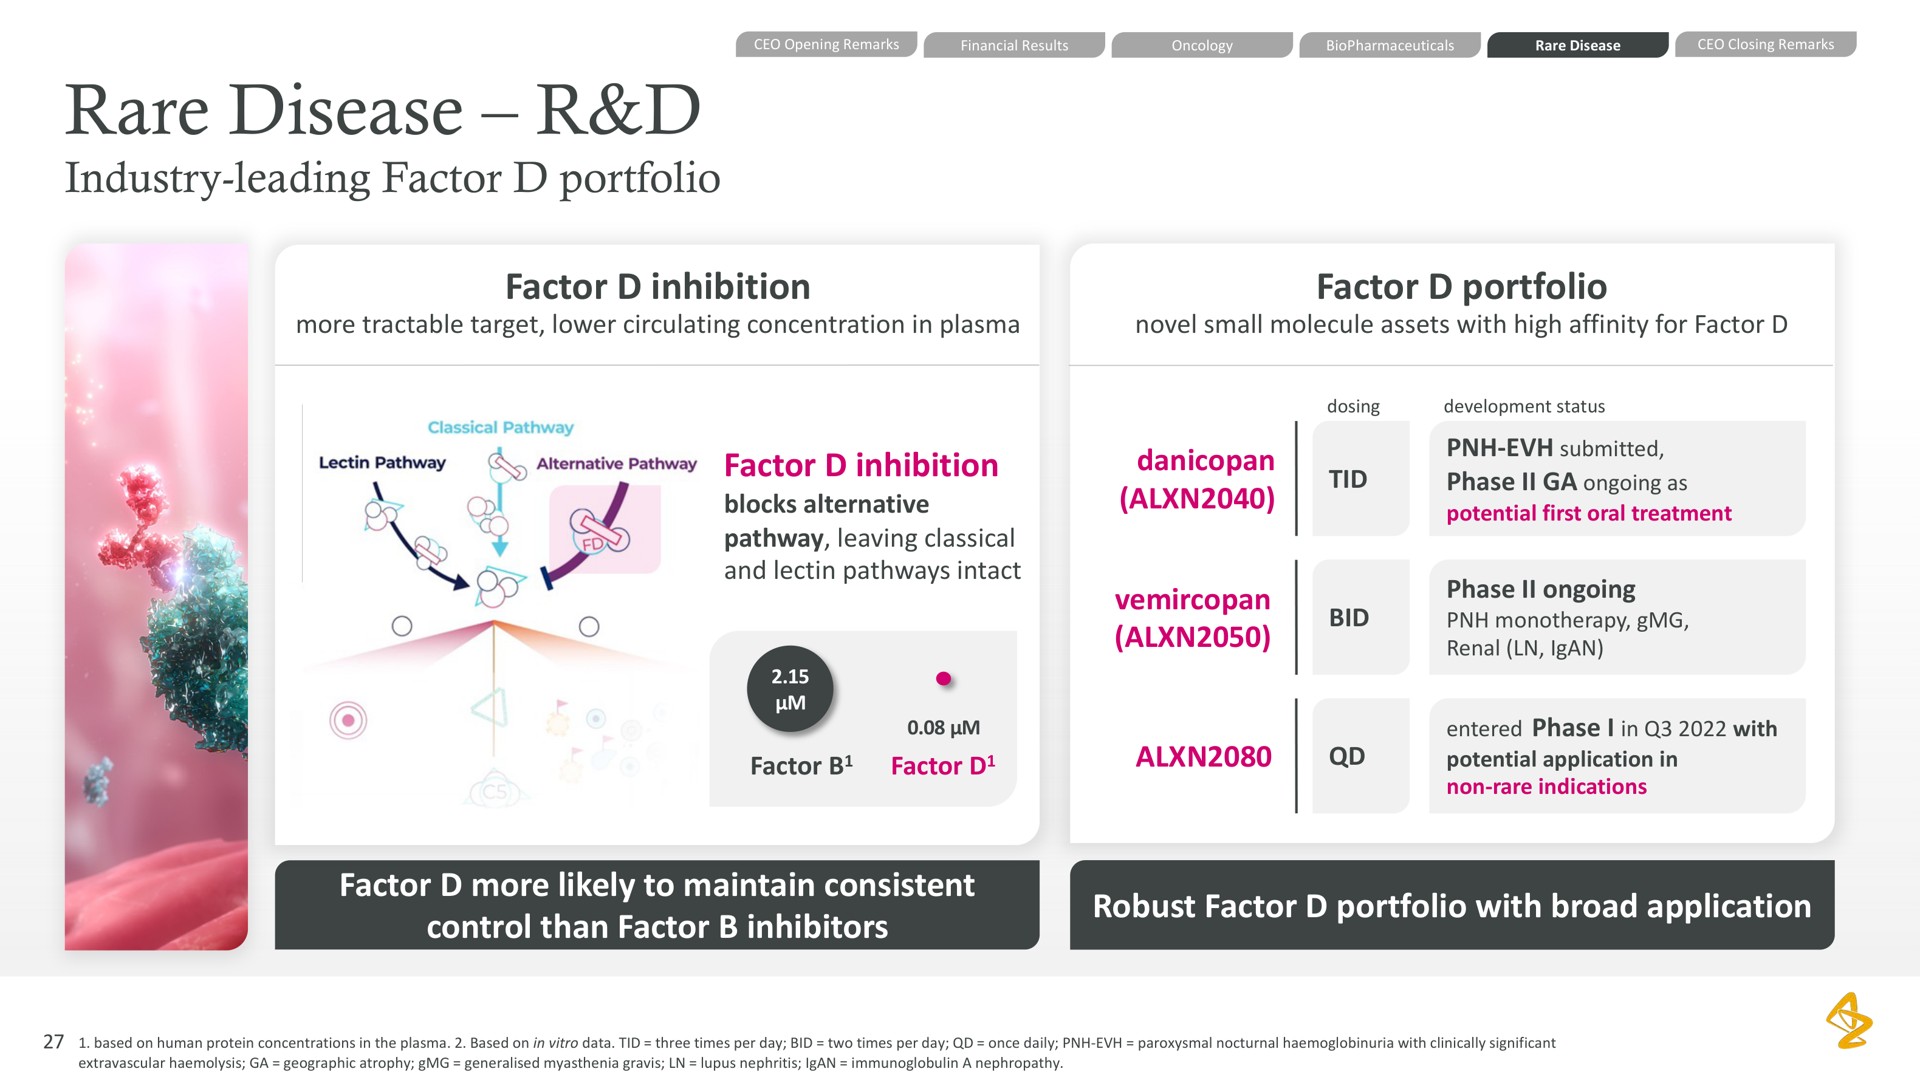 rare disease industry leading factor portfolio factor inhibition factor portfolio factor inhibition factor more likely to maintain consistent control than factor inhibitors robust factor portfolio with broad application | AstraZeneca